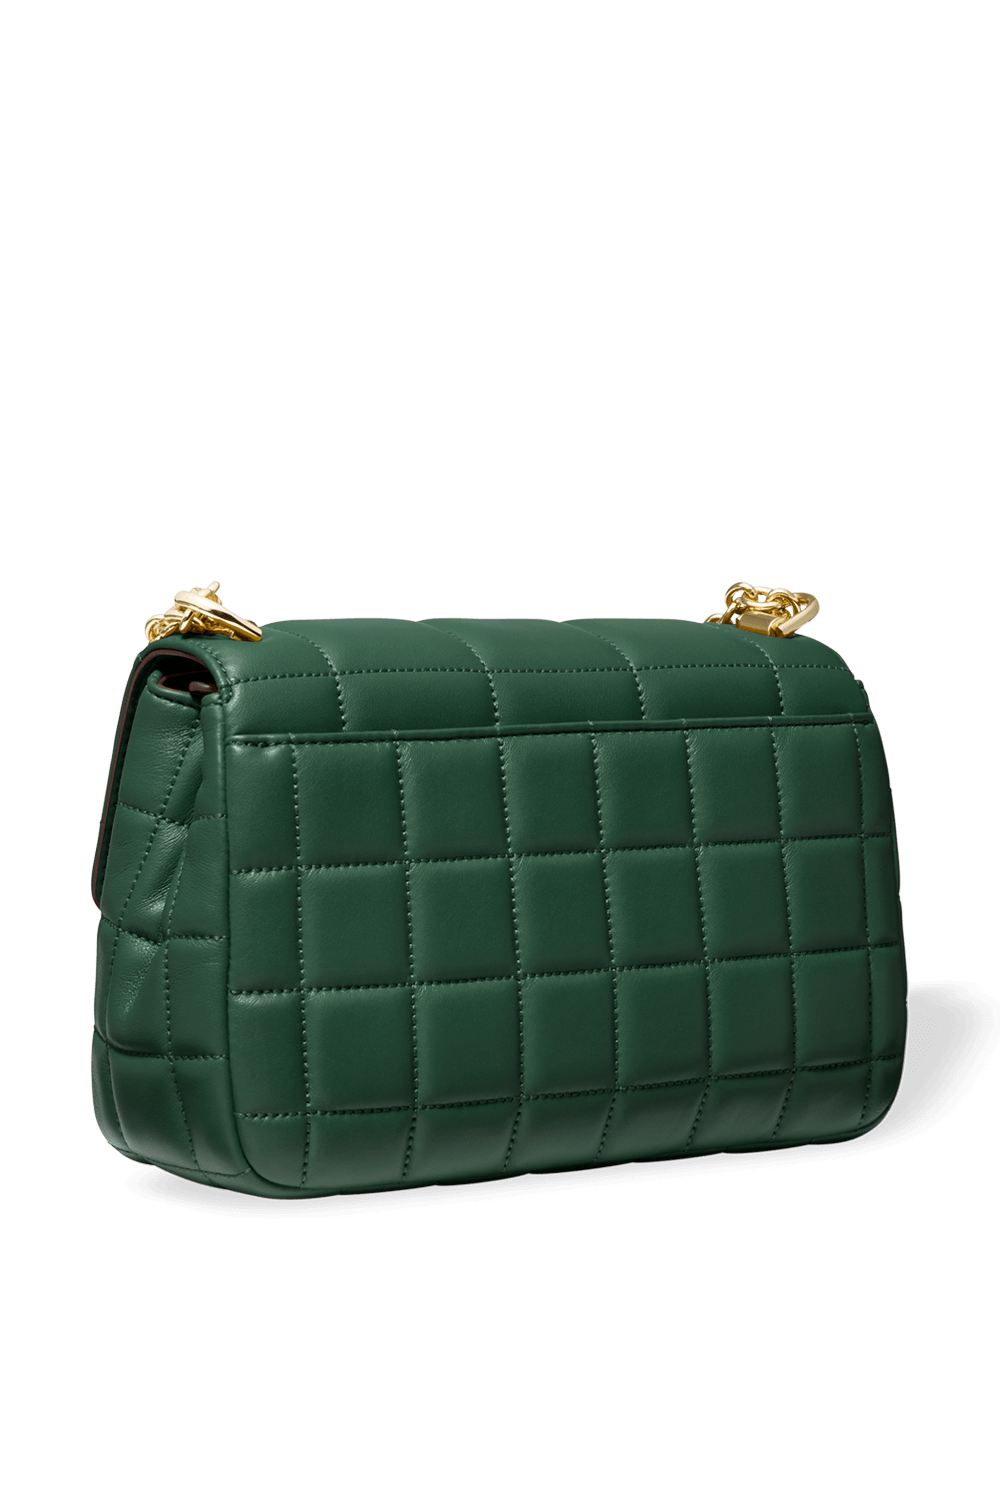 Soho LG Quilted Leather Shoulder Bag in Moss MICHAEL KORS